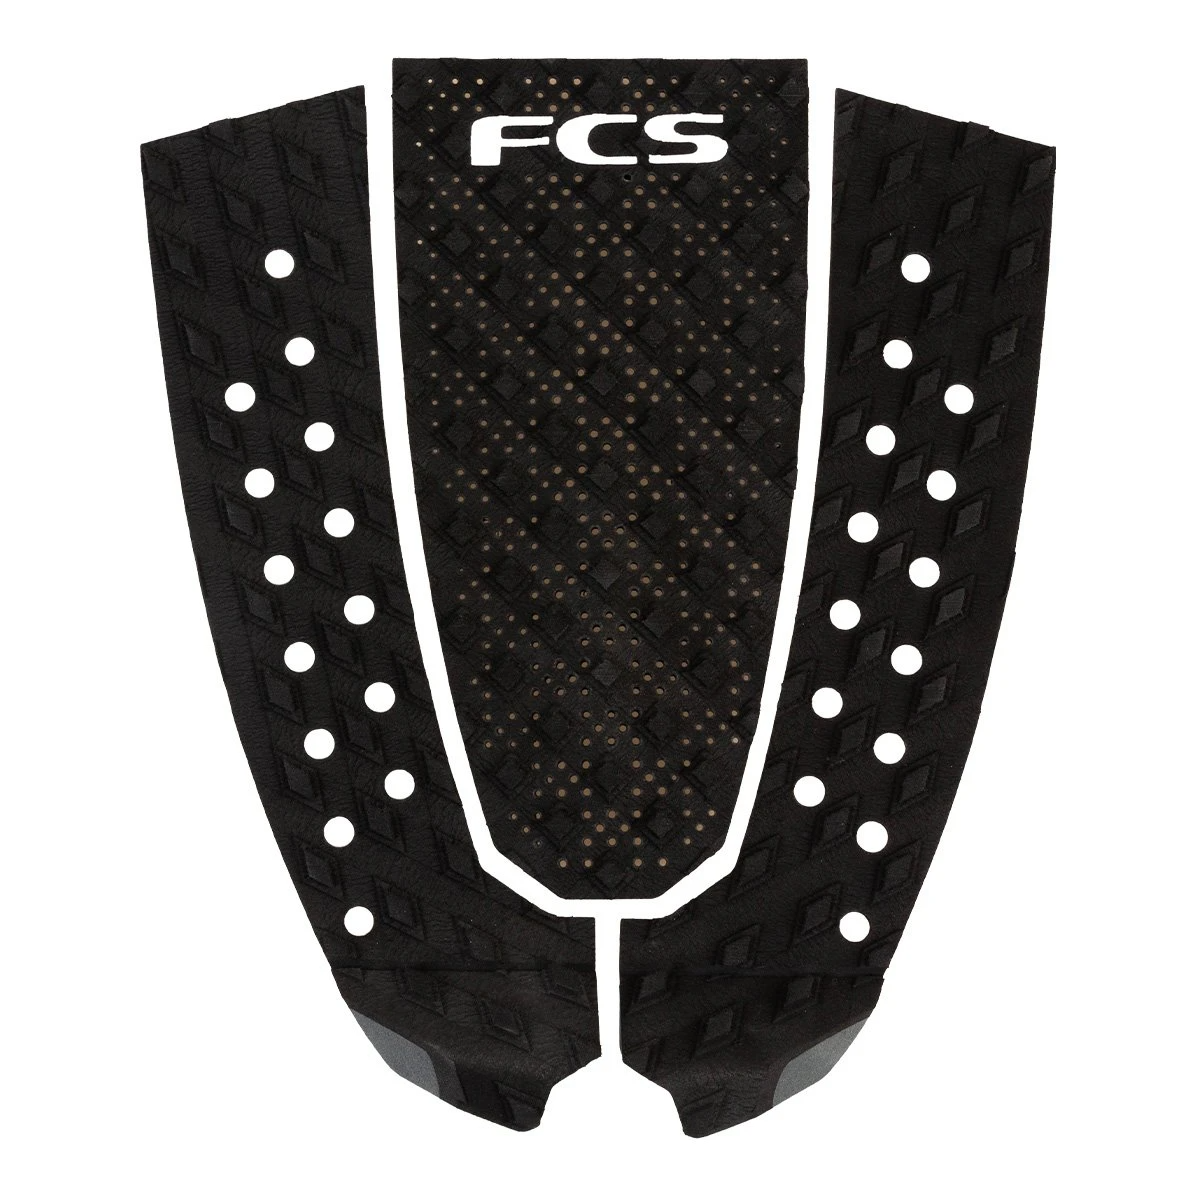 FCS T-3 PIN TAIL TRACTION PAD